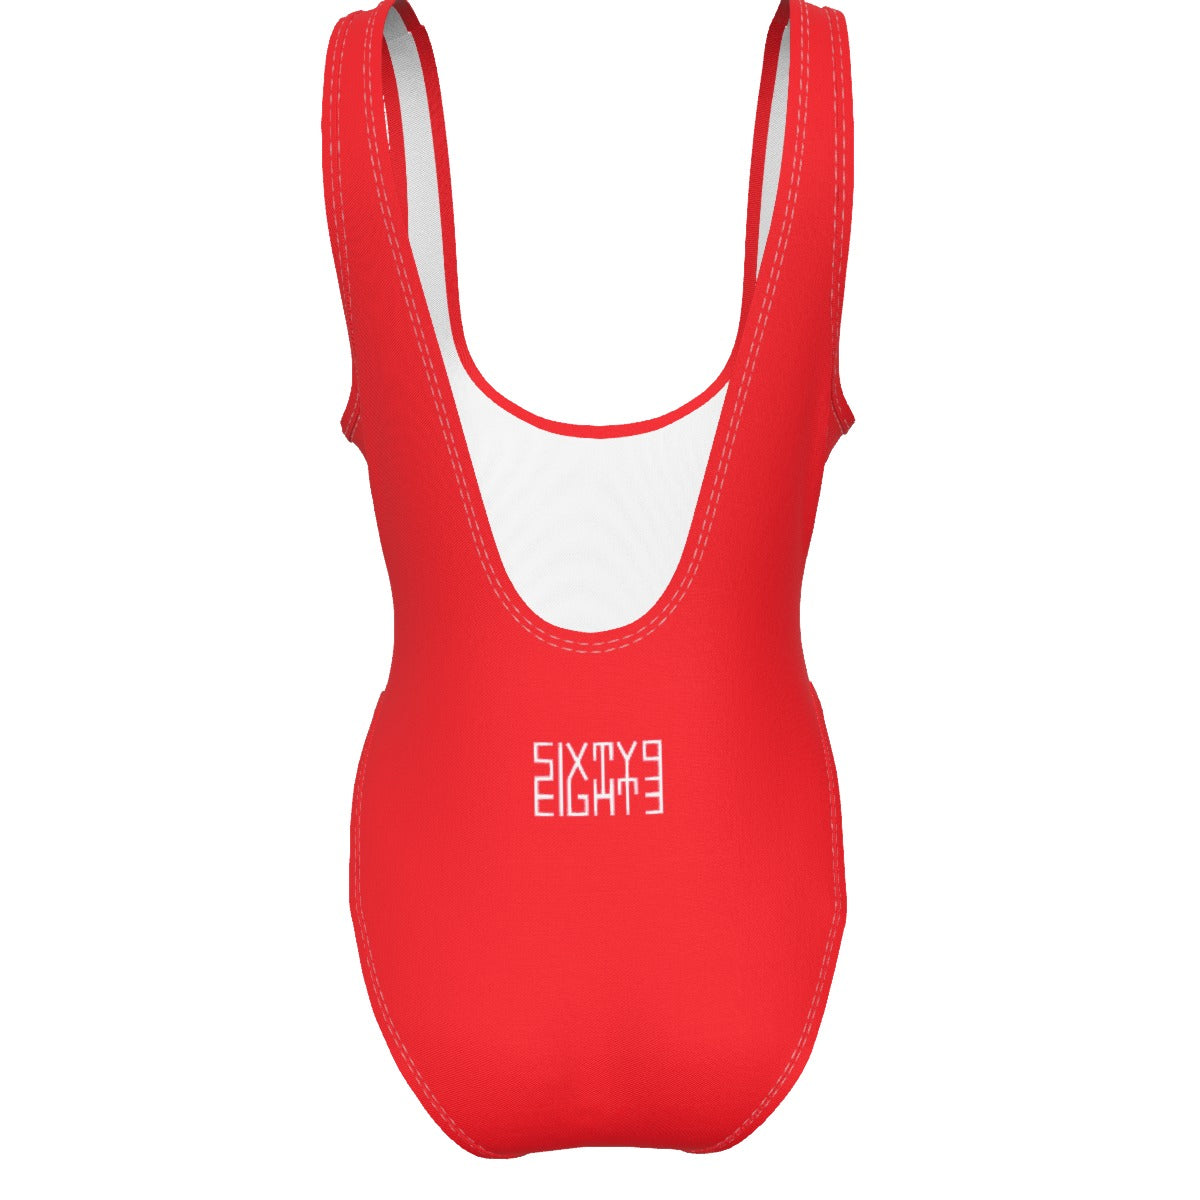 Sixty Eight 93 Logo White Red Women's High Cut One-Piece Swimsuit